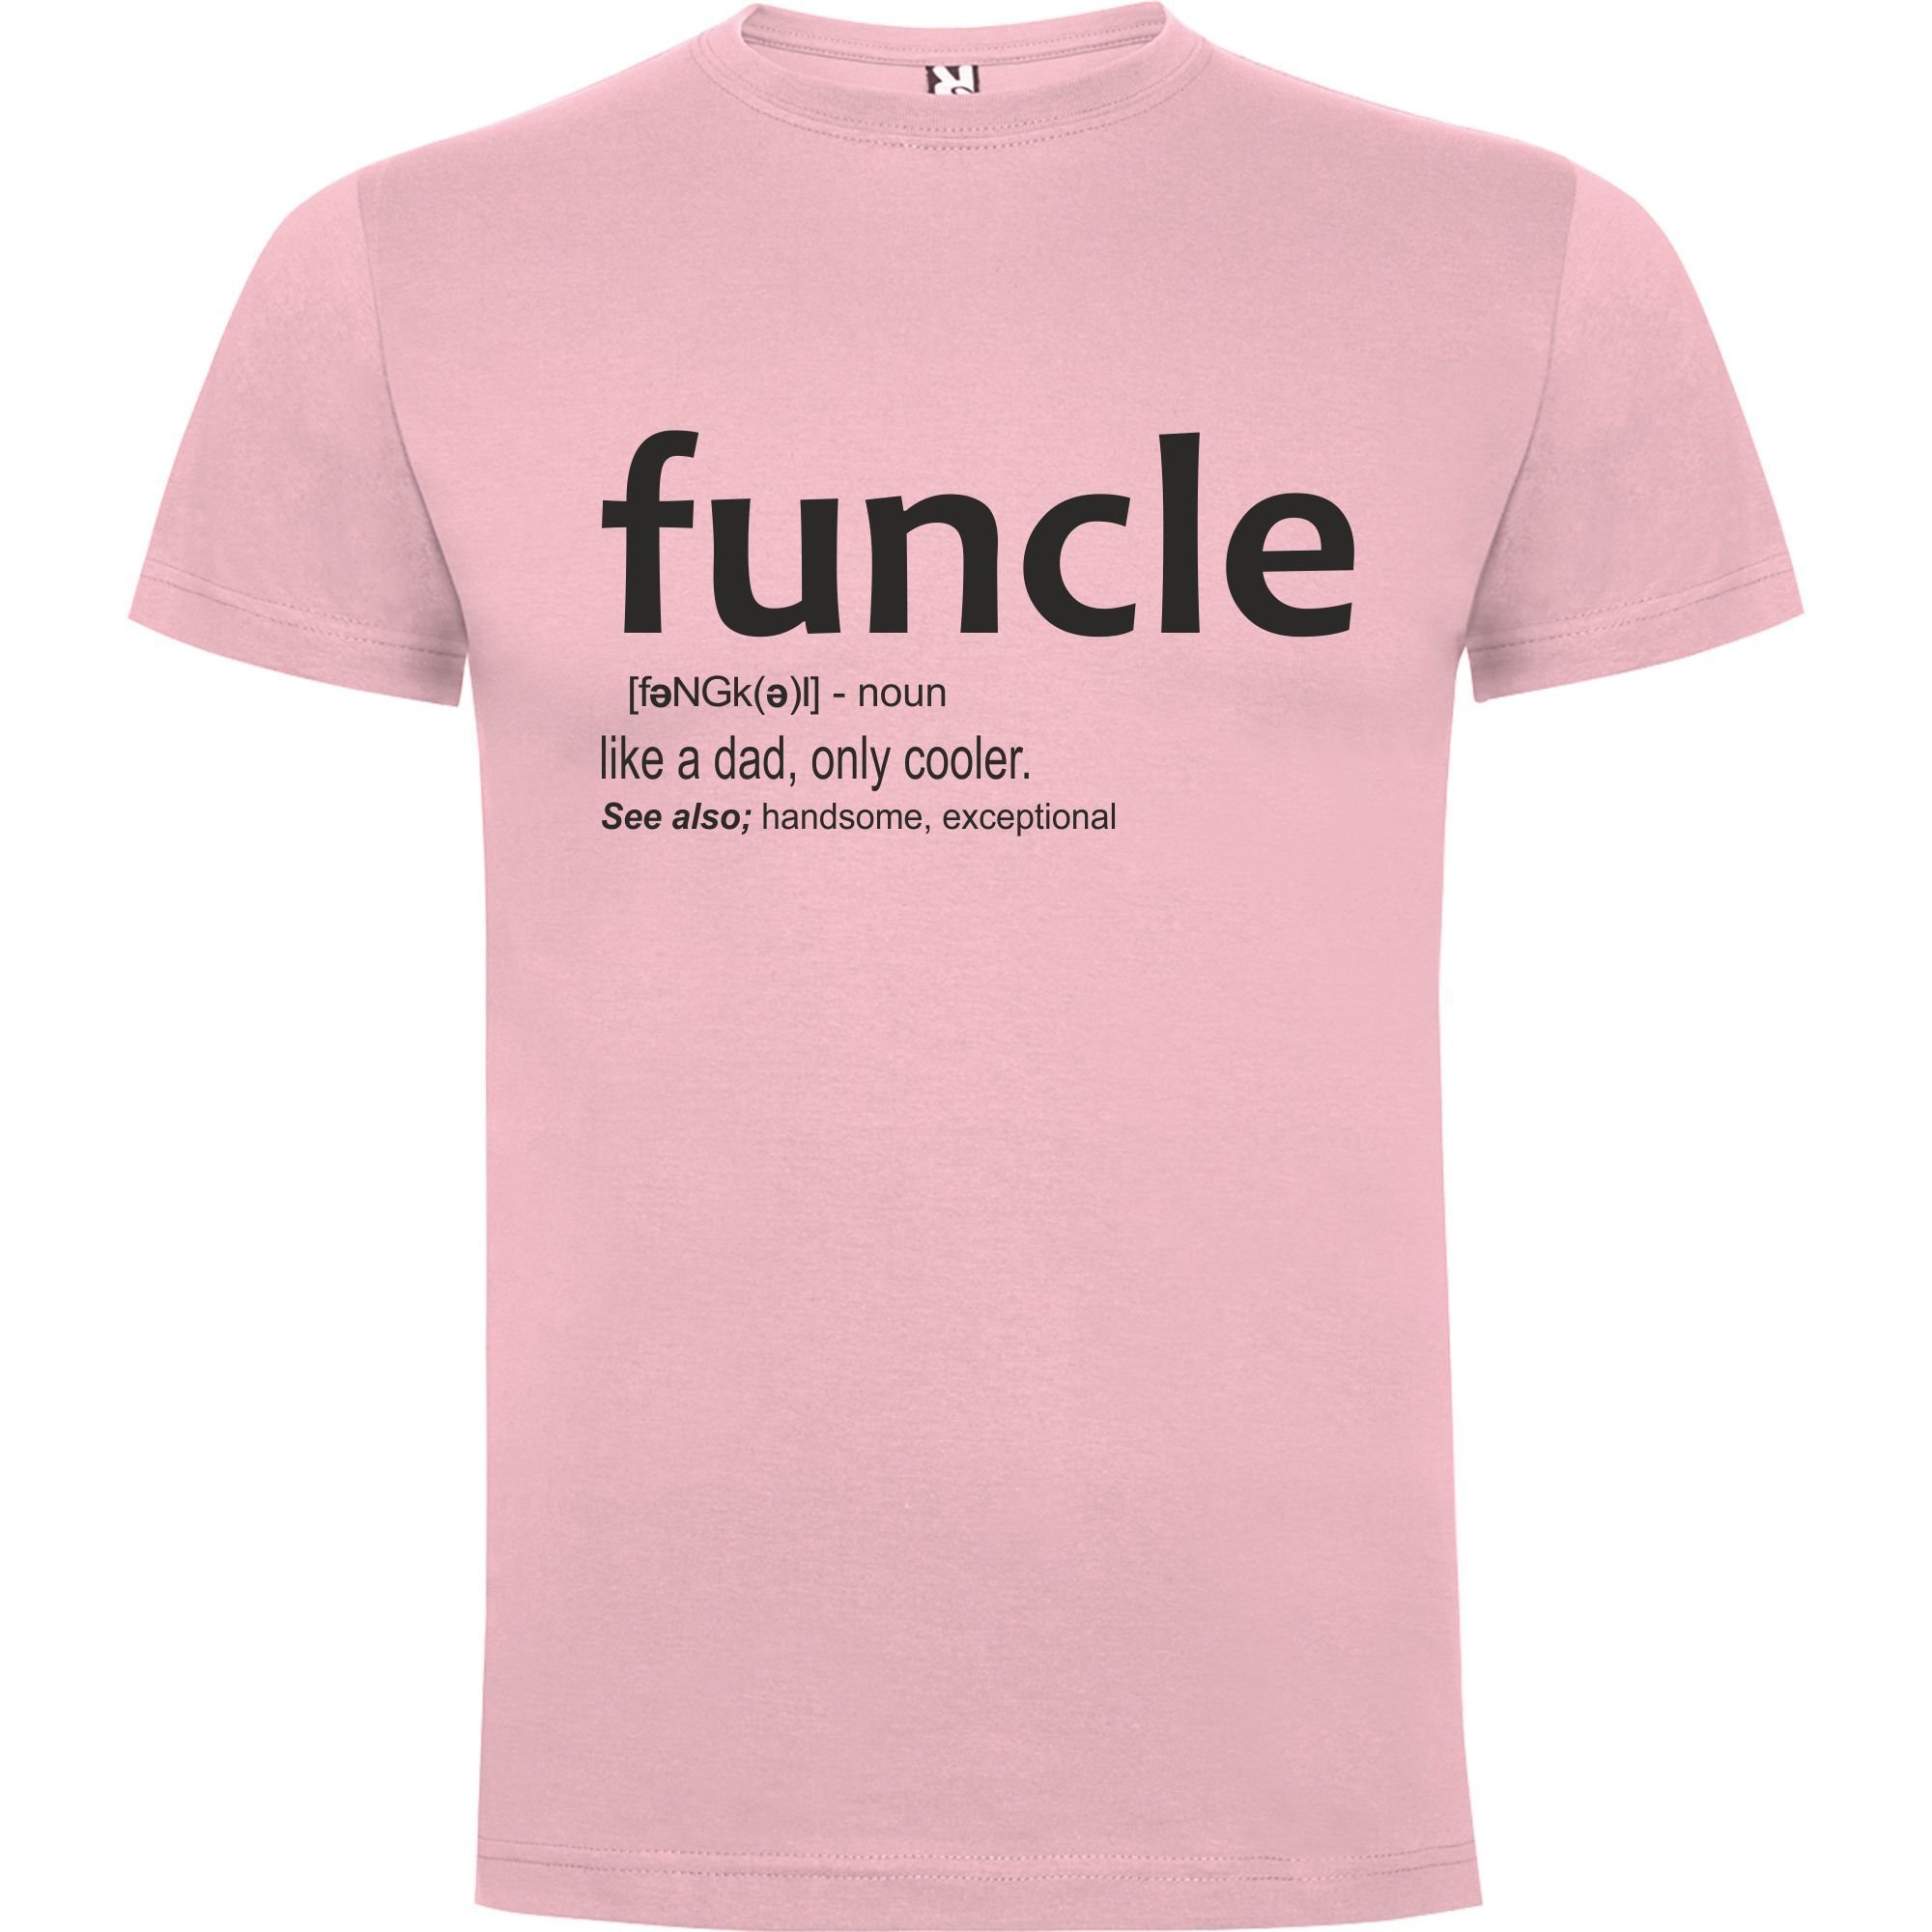 FUNCLE - For a cool Uncle